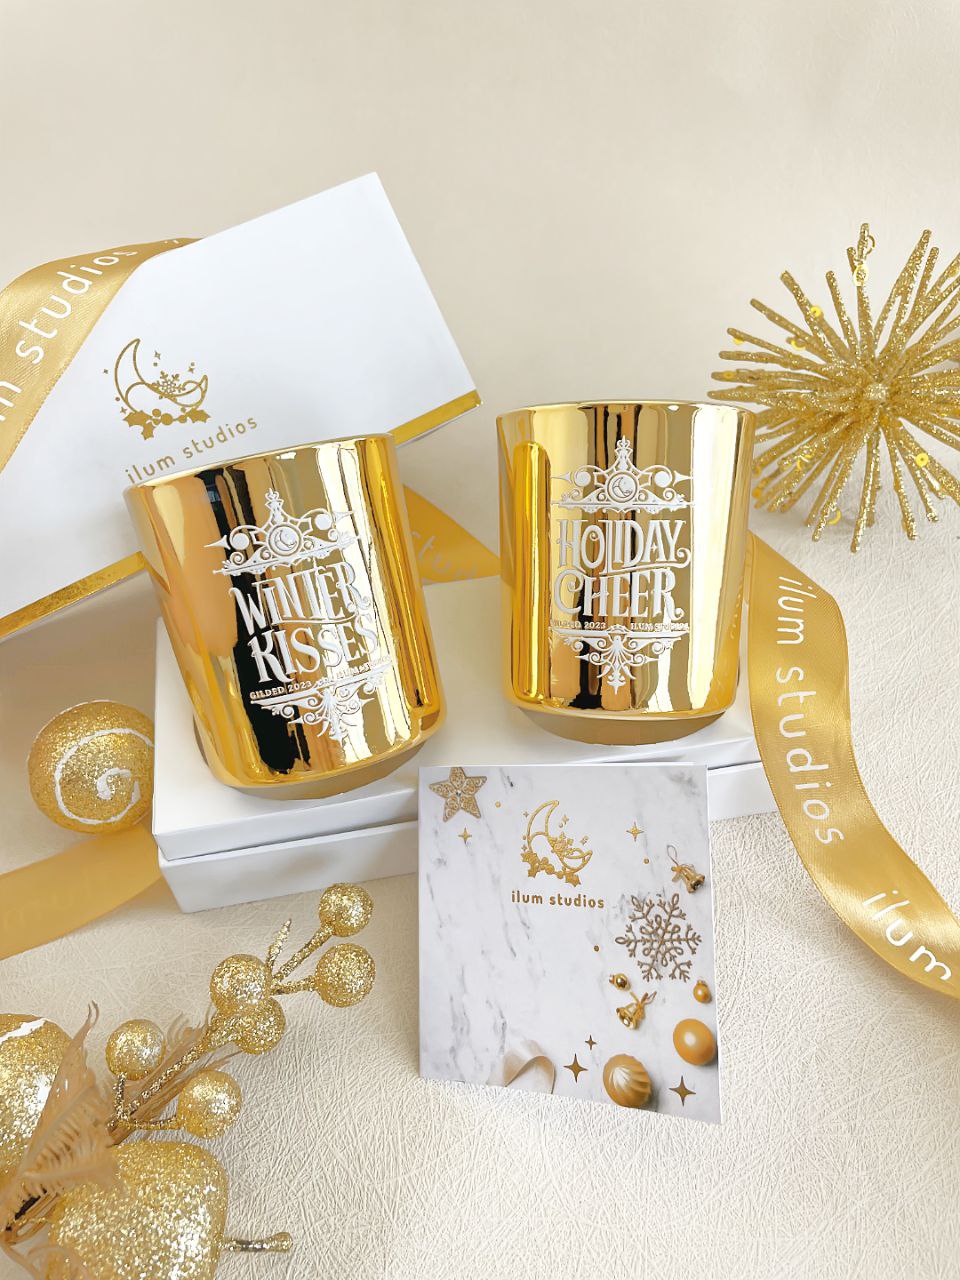 Gilded Duo Gift Set - 2 7oz Gilded Candles in Gift Box